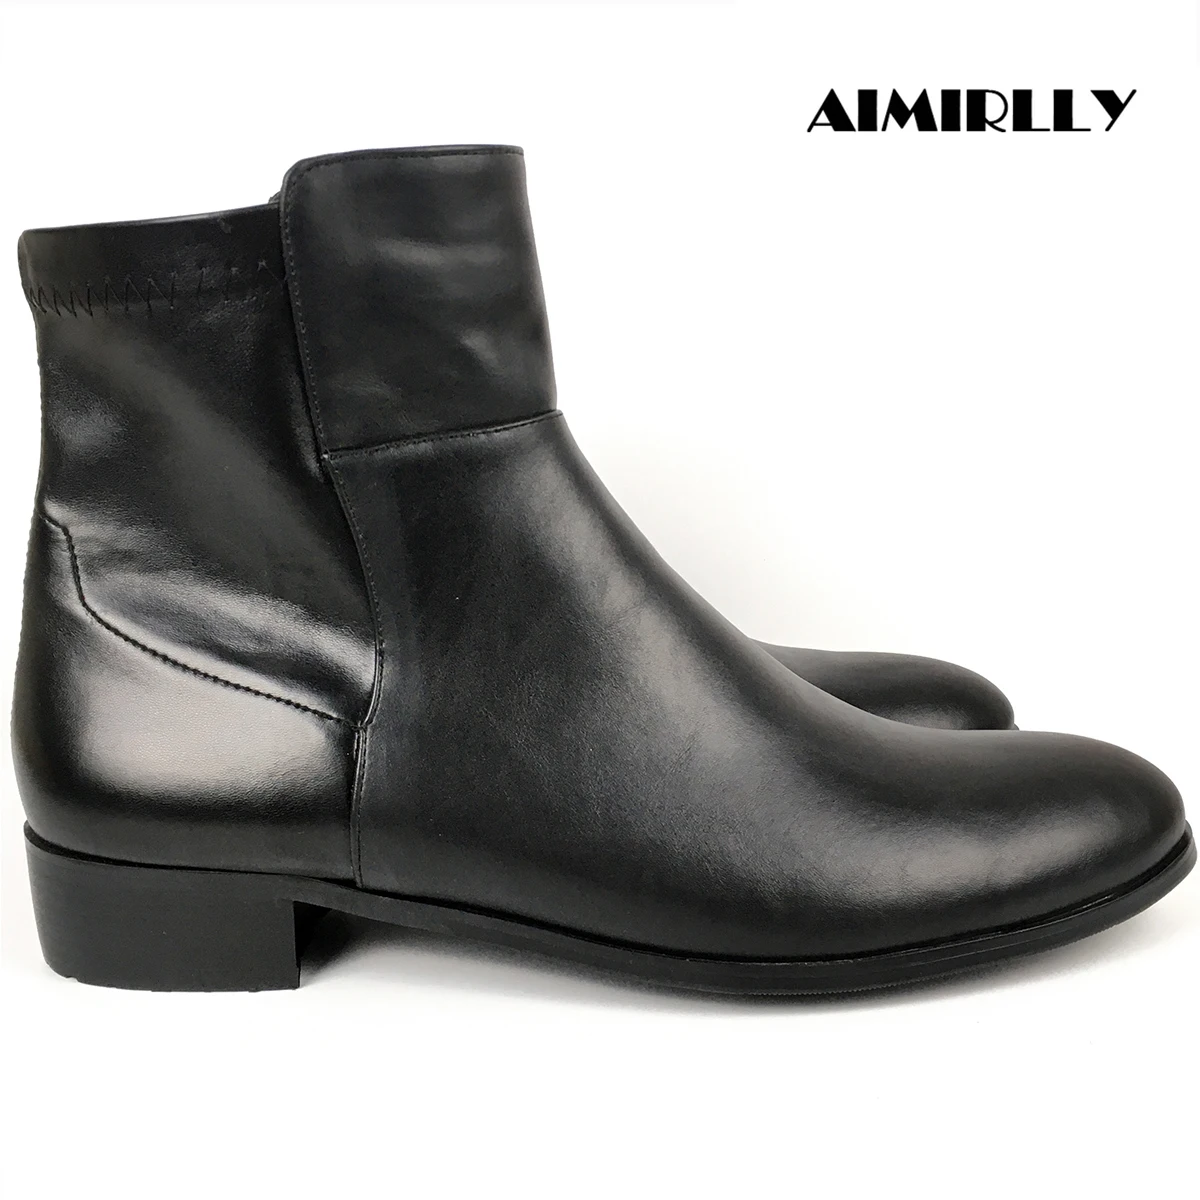 

Women's Shoes Round Toe Flat Ankle Boots Slip On Autumn Winter Casual Booties Female Foorwear Black Aimirlly